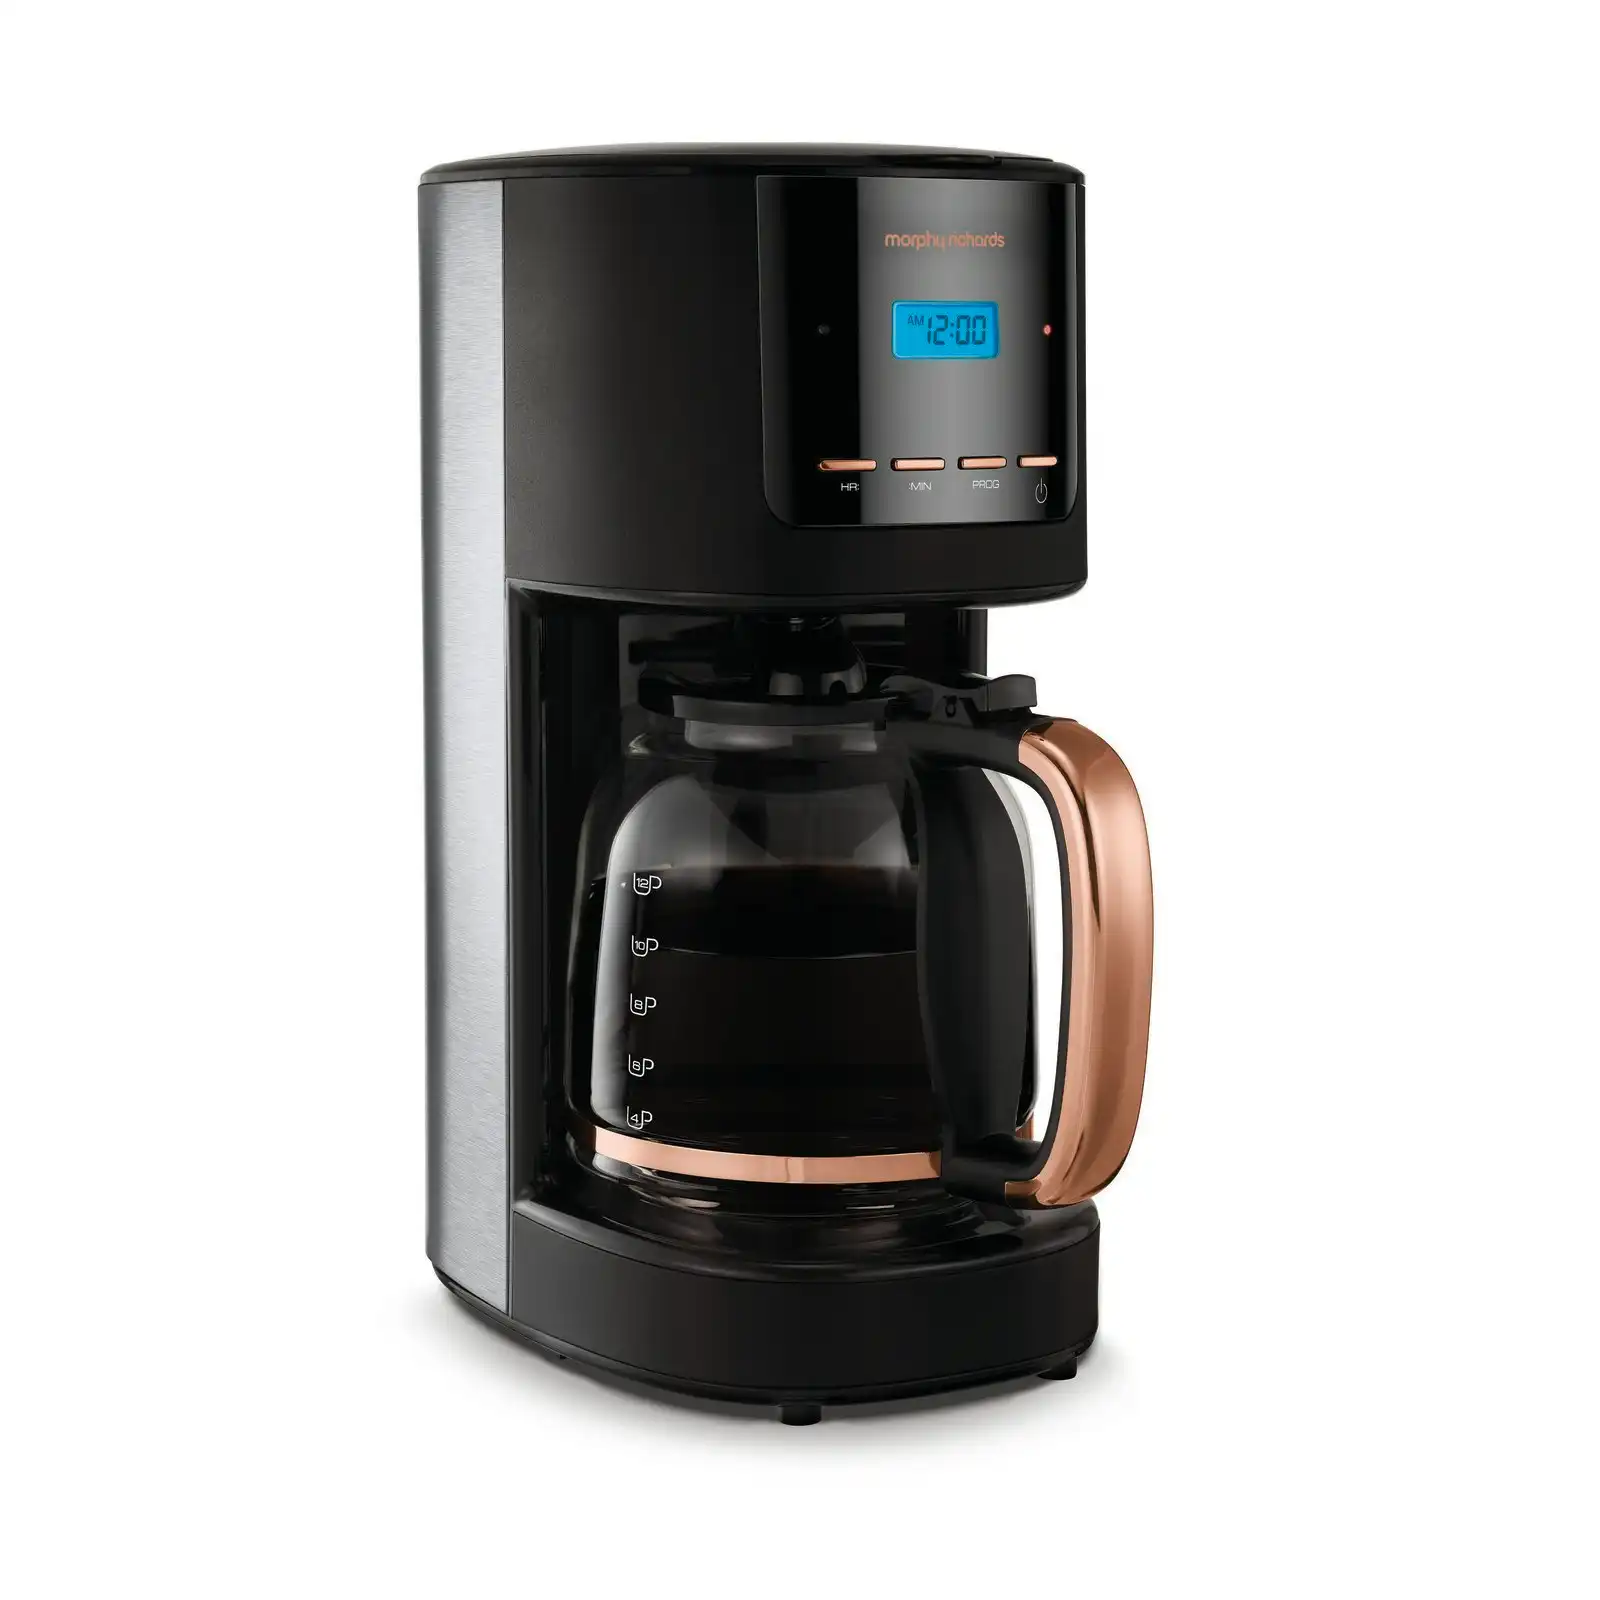 Morphy Richards 12 cup / 1.8L Accents Filter Coffee Machine - Rose Gold/Black